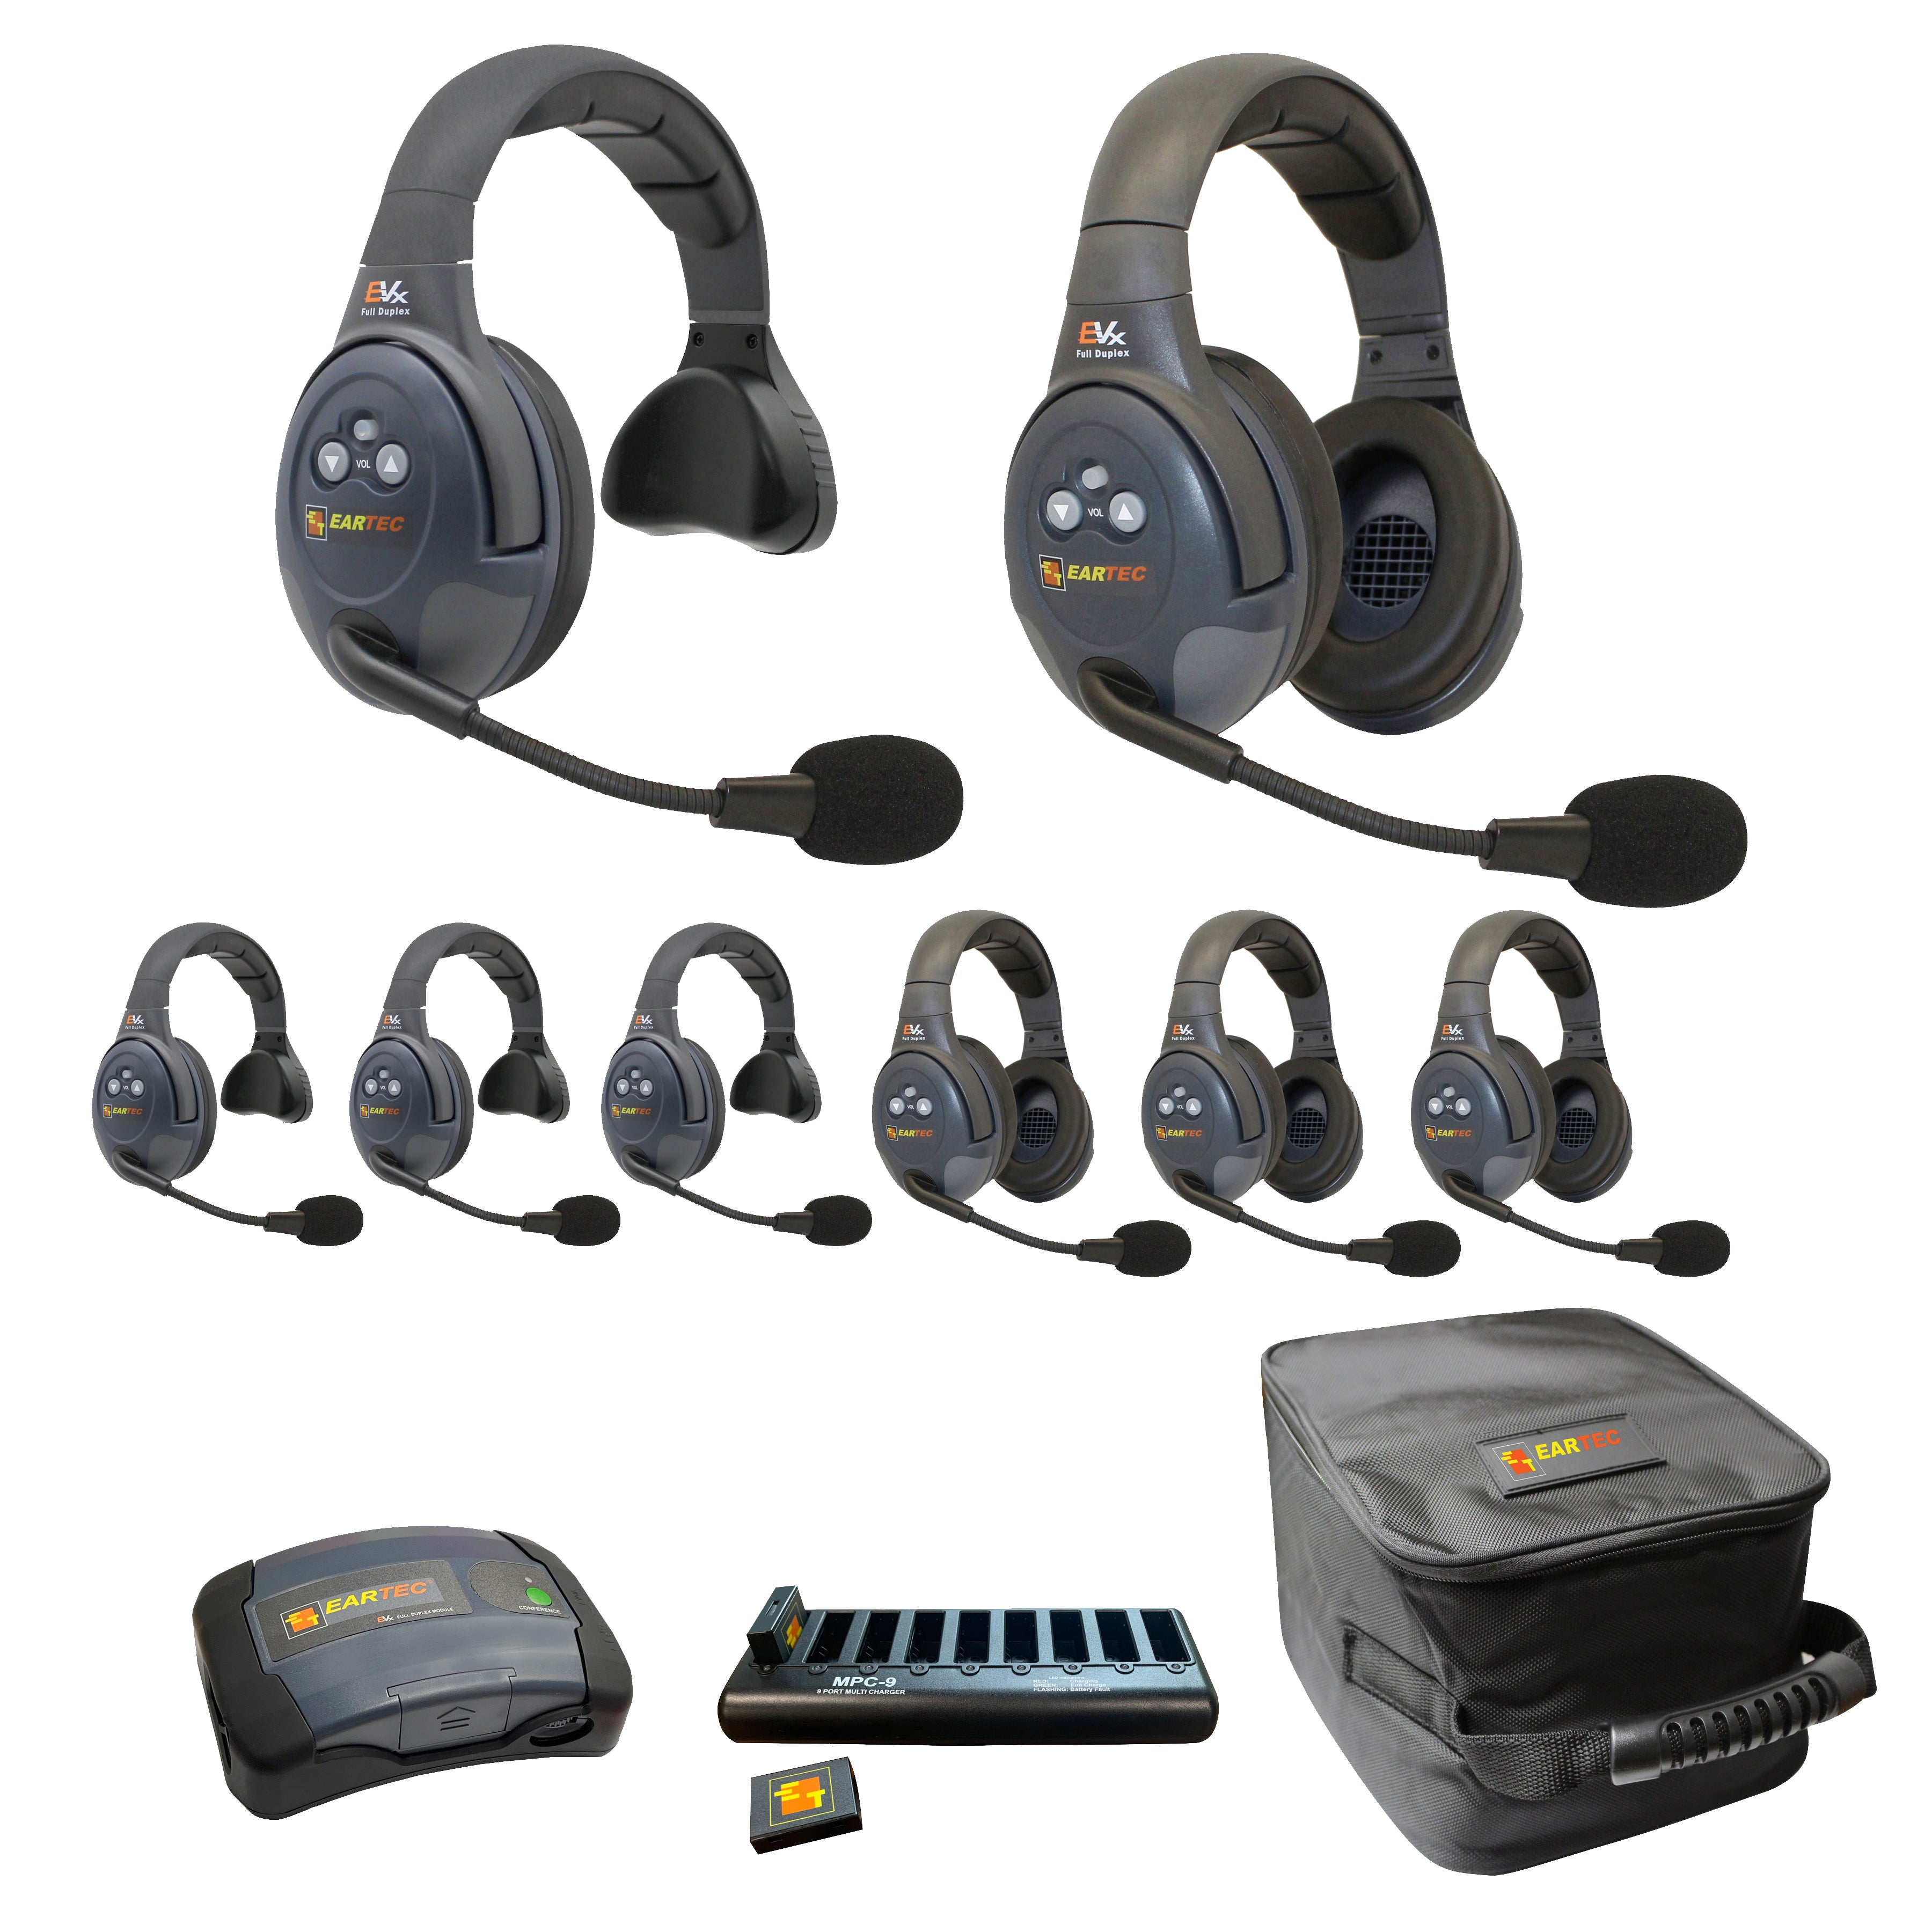 Eartec 1- EVADE C-MOD 1- EVADE Single-Ear Main Headset 3- EVADE Single-Ear Remote Headset 4- EVADE Double-Ear Remote Headsets 1- 9-Port Charger w/ Adapter 1- Extra large Soft Padded Case 8 X Lithium-Polymer Batteries EVX844-CM